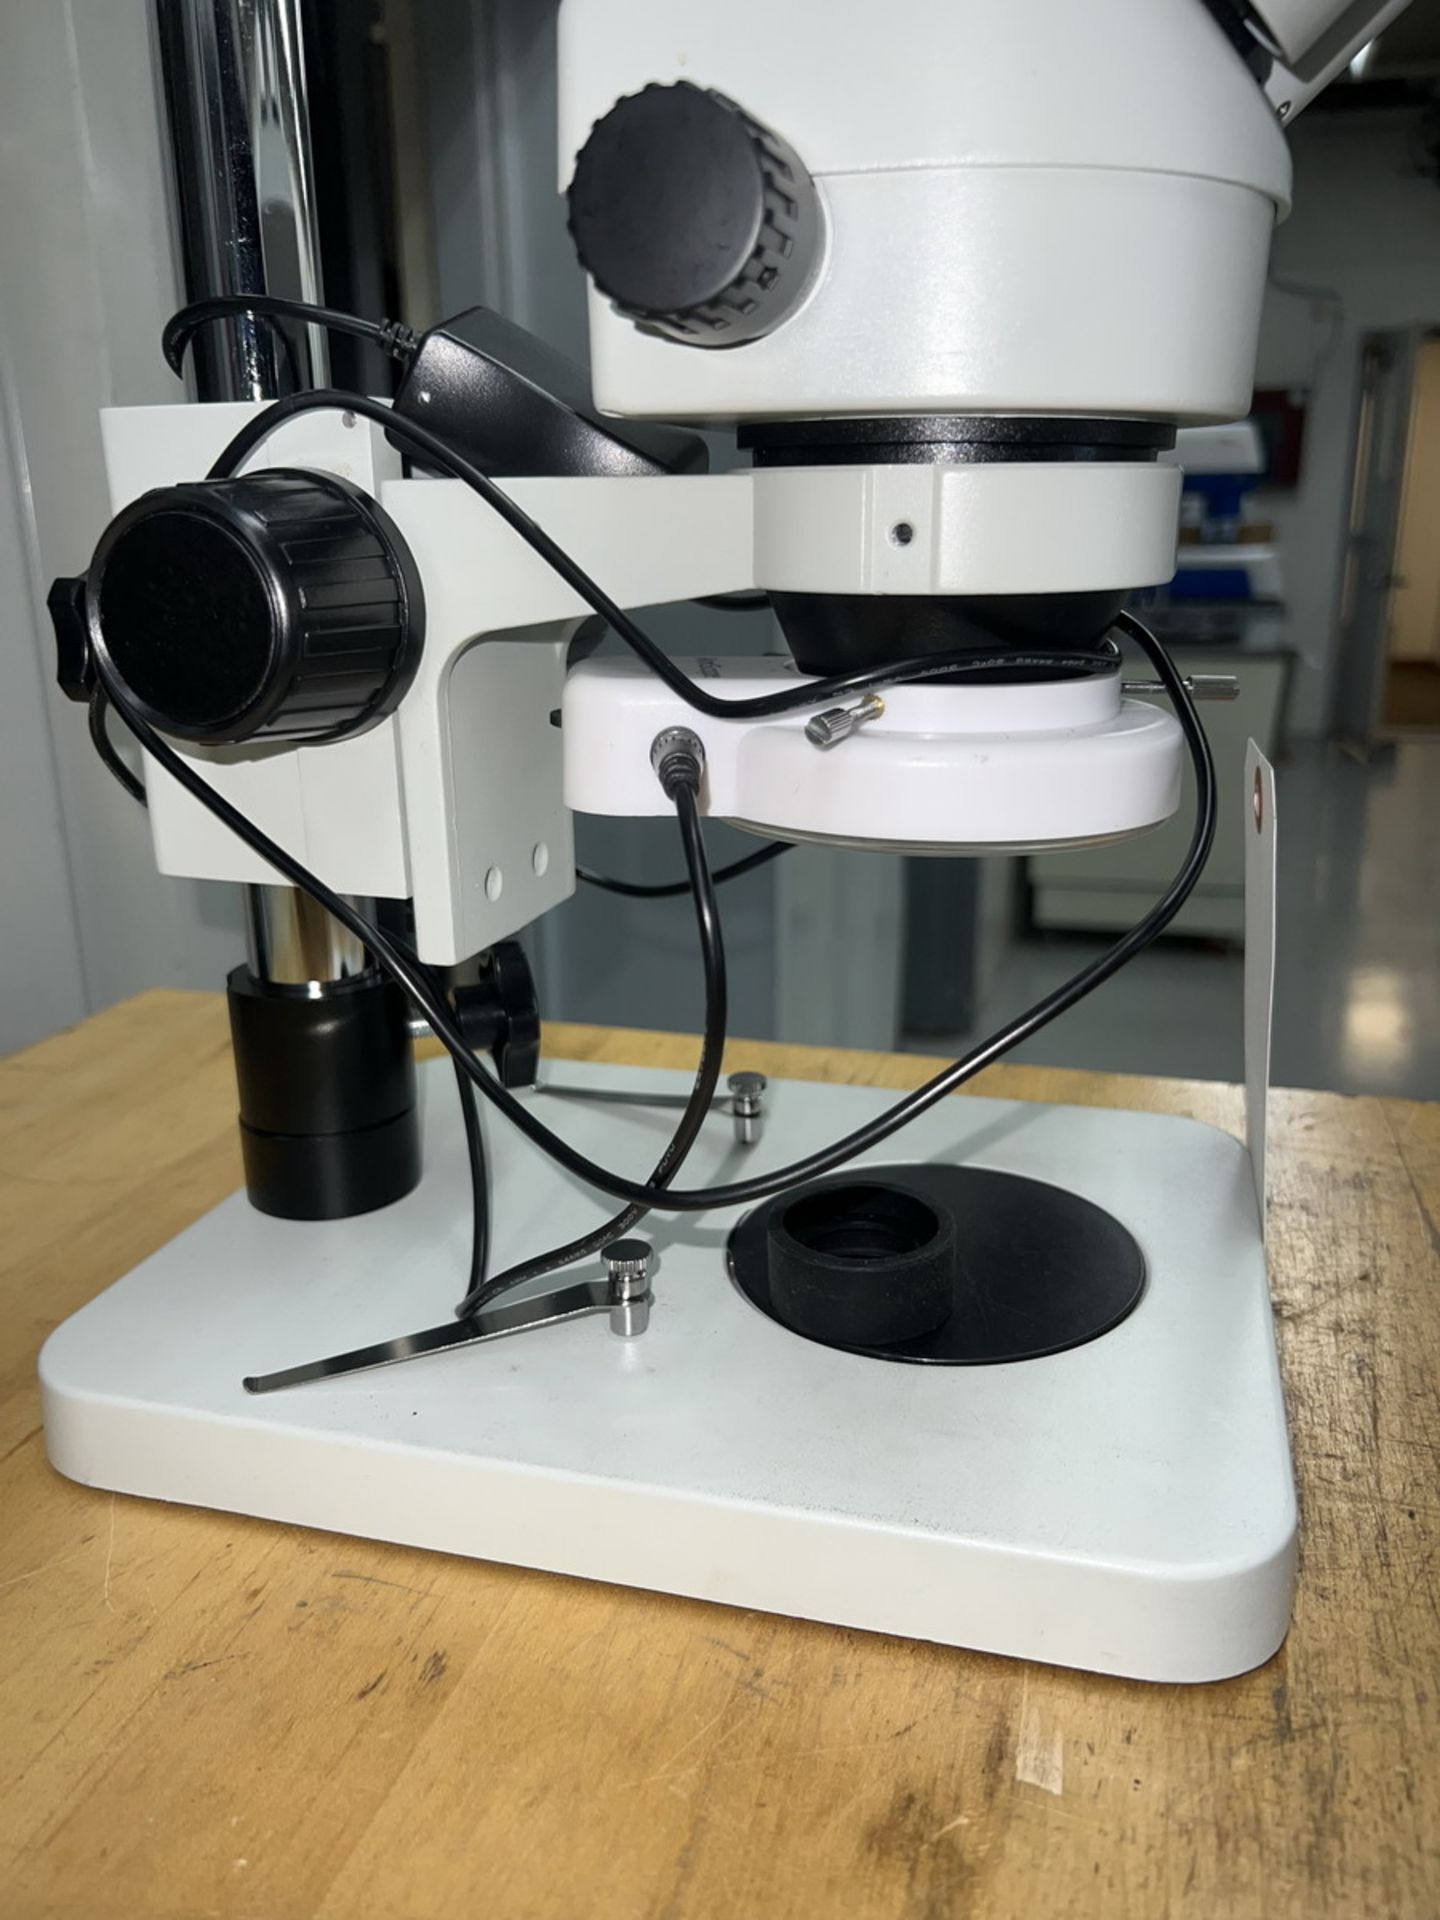 0.7x-4.5x Stereo Zoom Microscope - Image 6 of 6